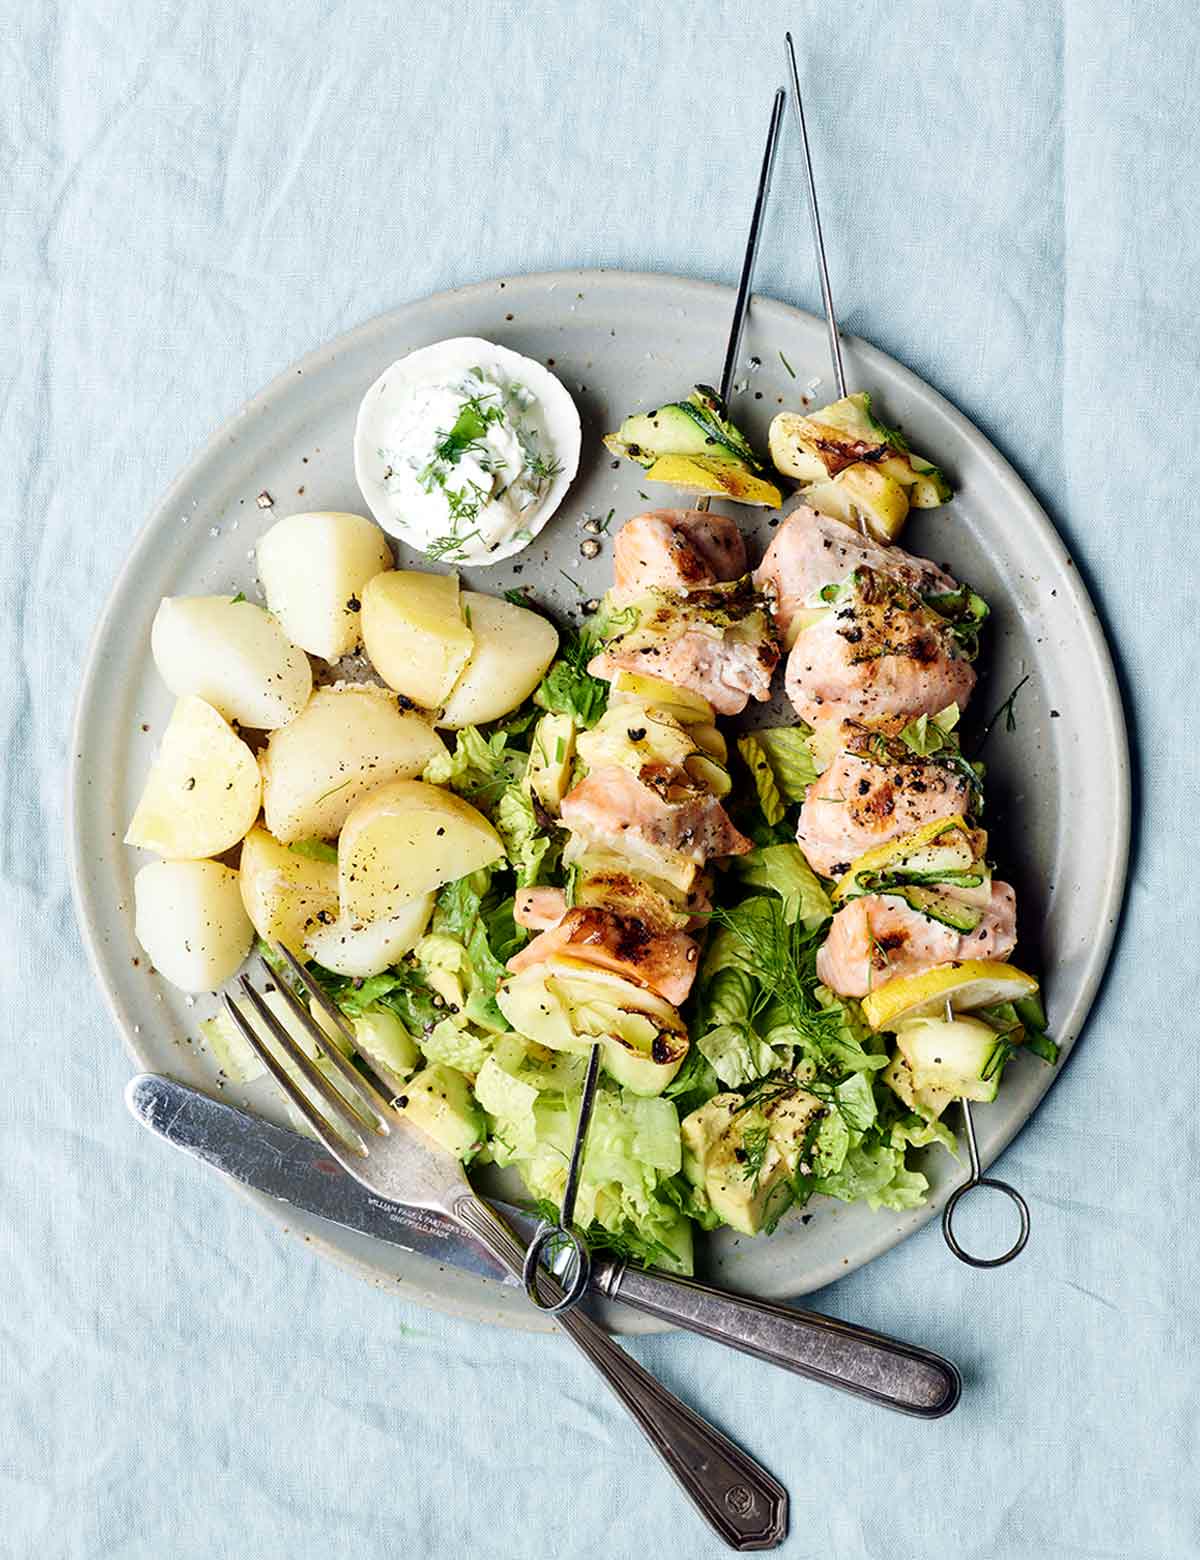 A plate with two grilled salmon and zucchini skewers with potatoes on the side